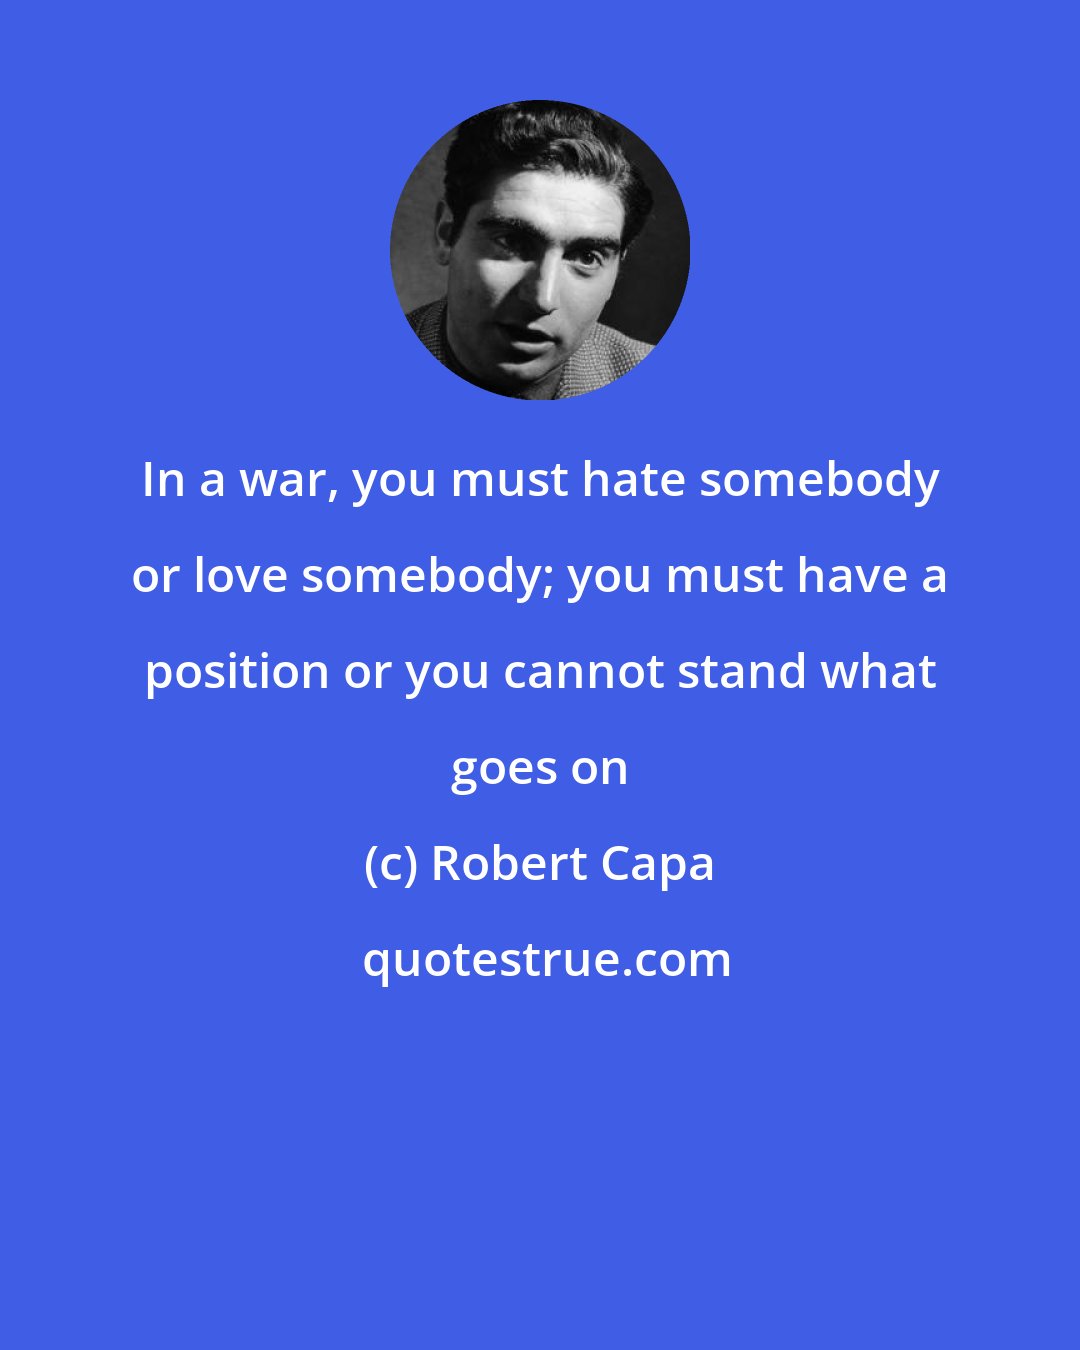 Robert Capa: In a war, you must hate somebody or love somebody; you must have a position or you cannot stand what goes on